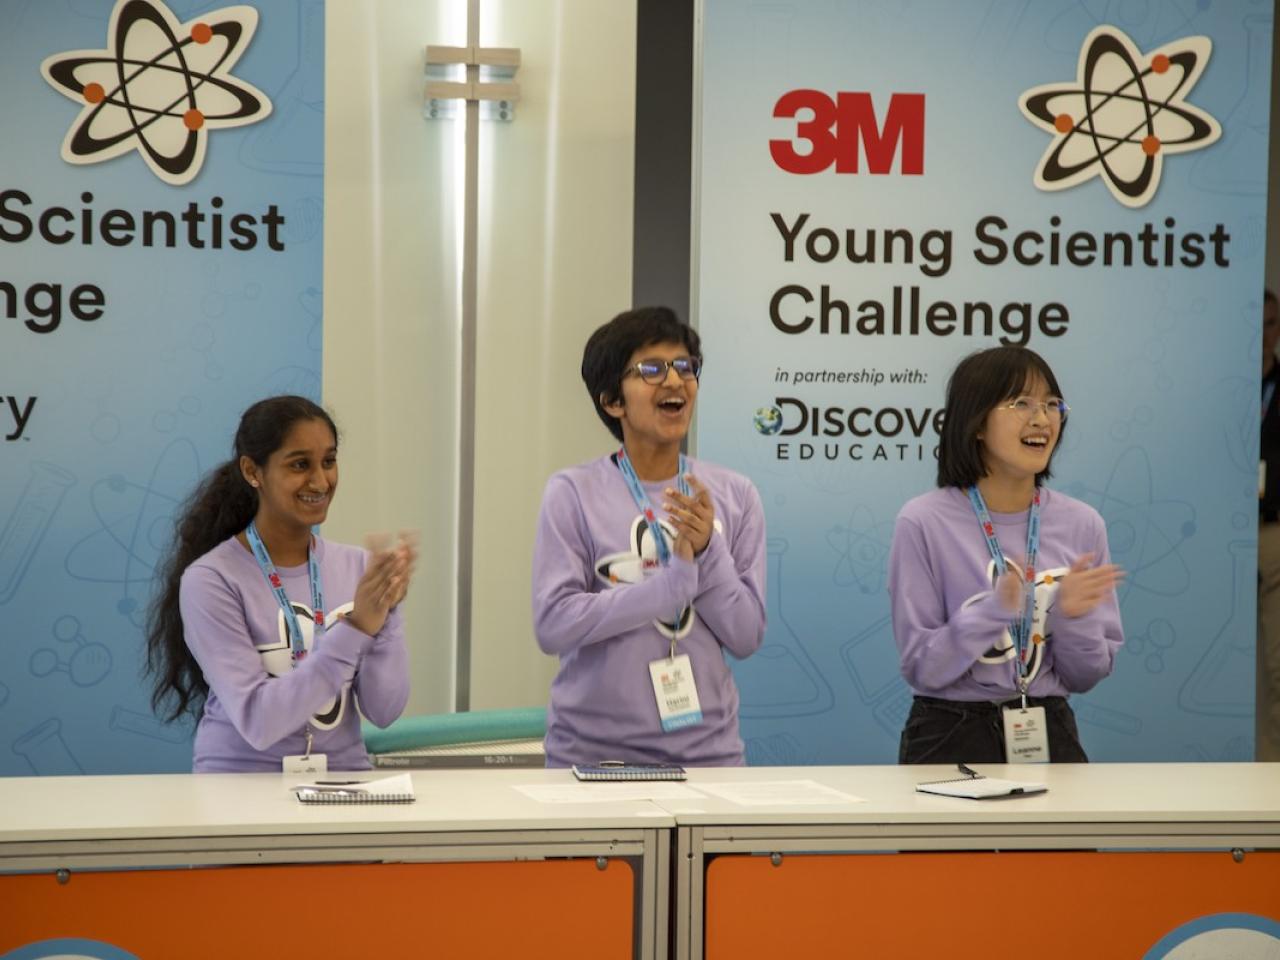 3M Young Scientist Challenge. Three student shown on a panel.